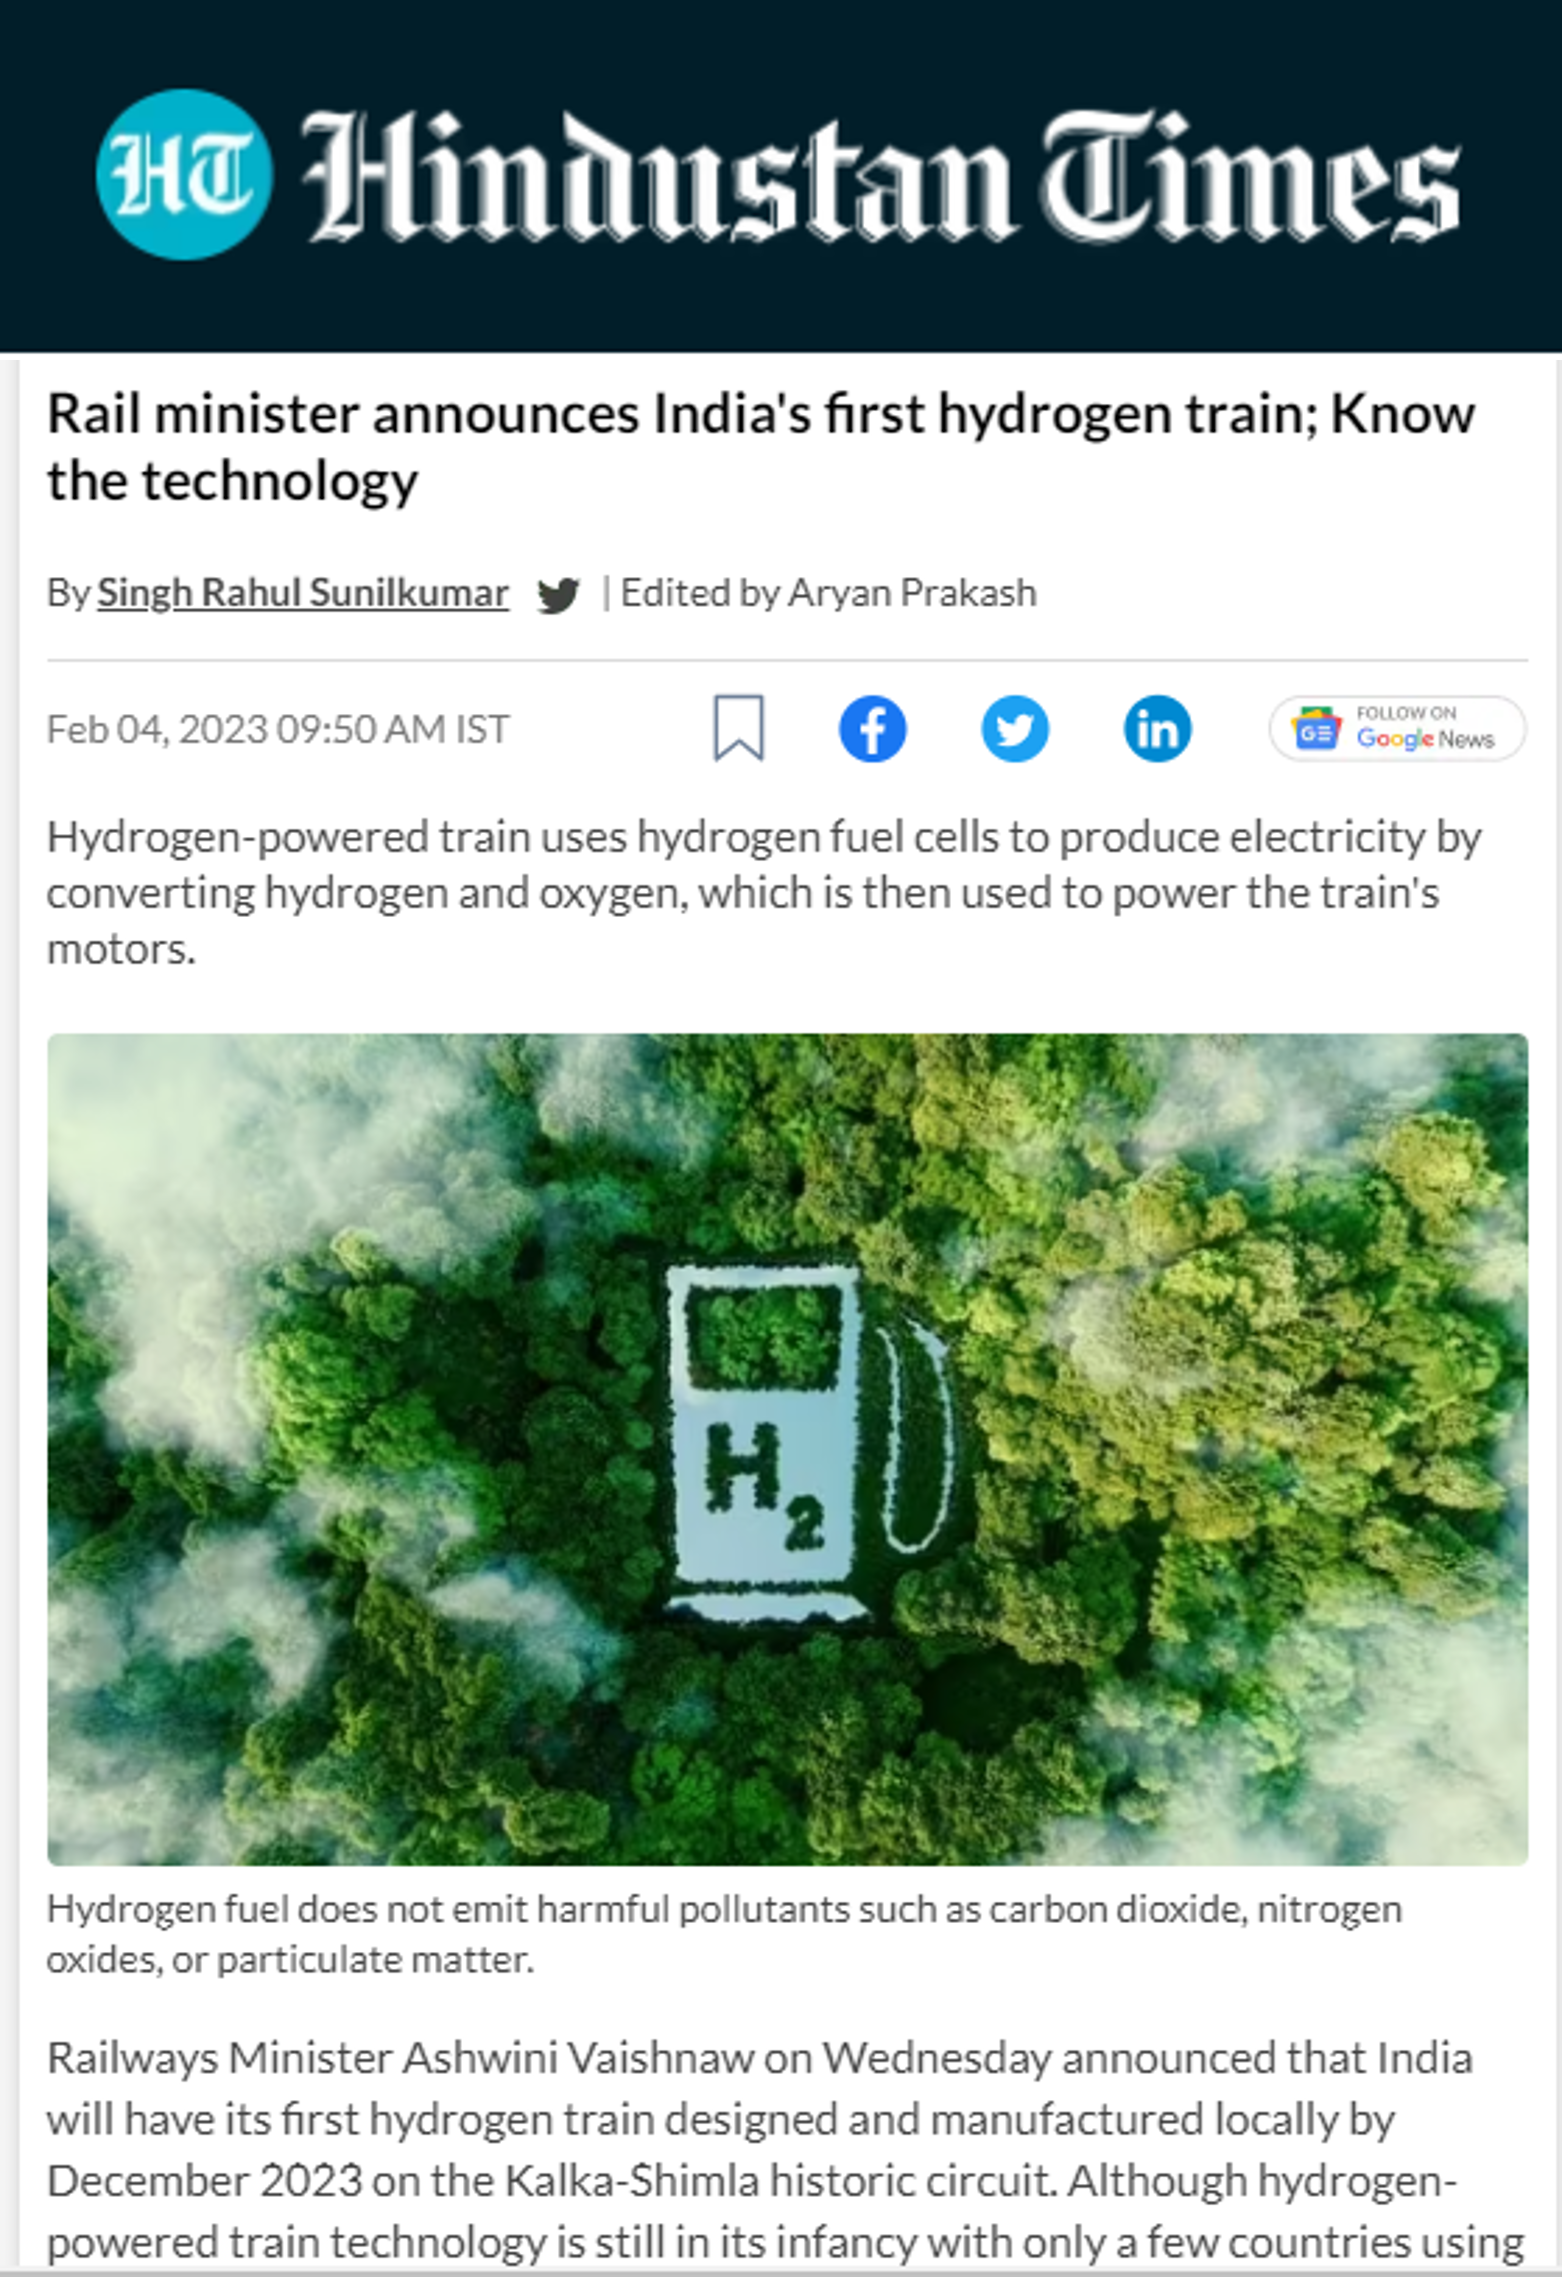 Dhiraj’s Op-Ed on green hydrogen in passenger trains mentioned in an article by Hindustan Times